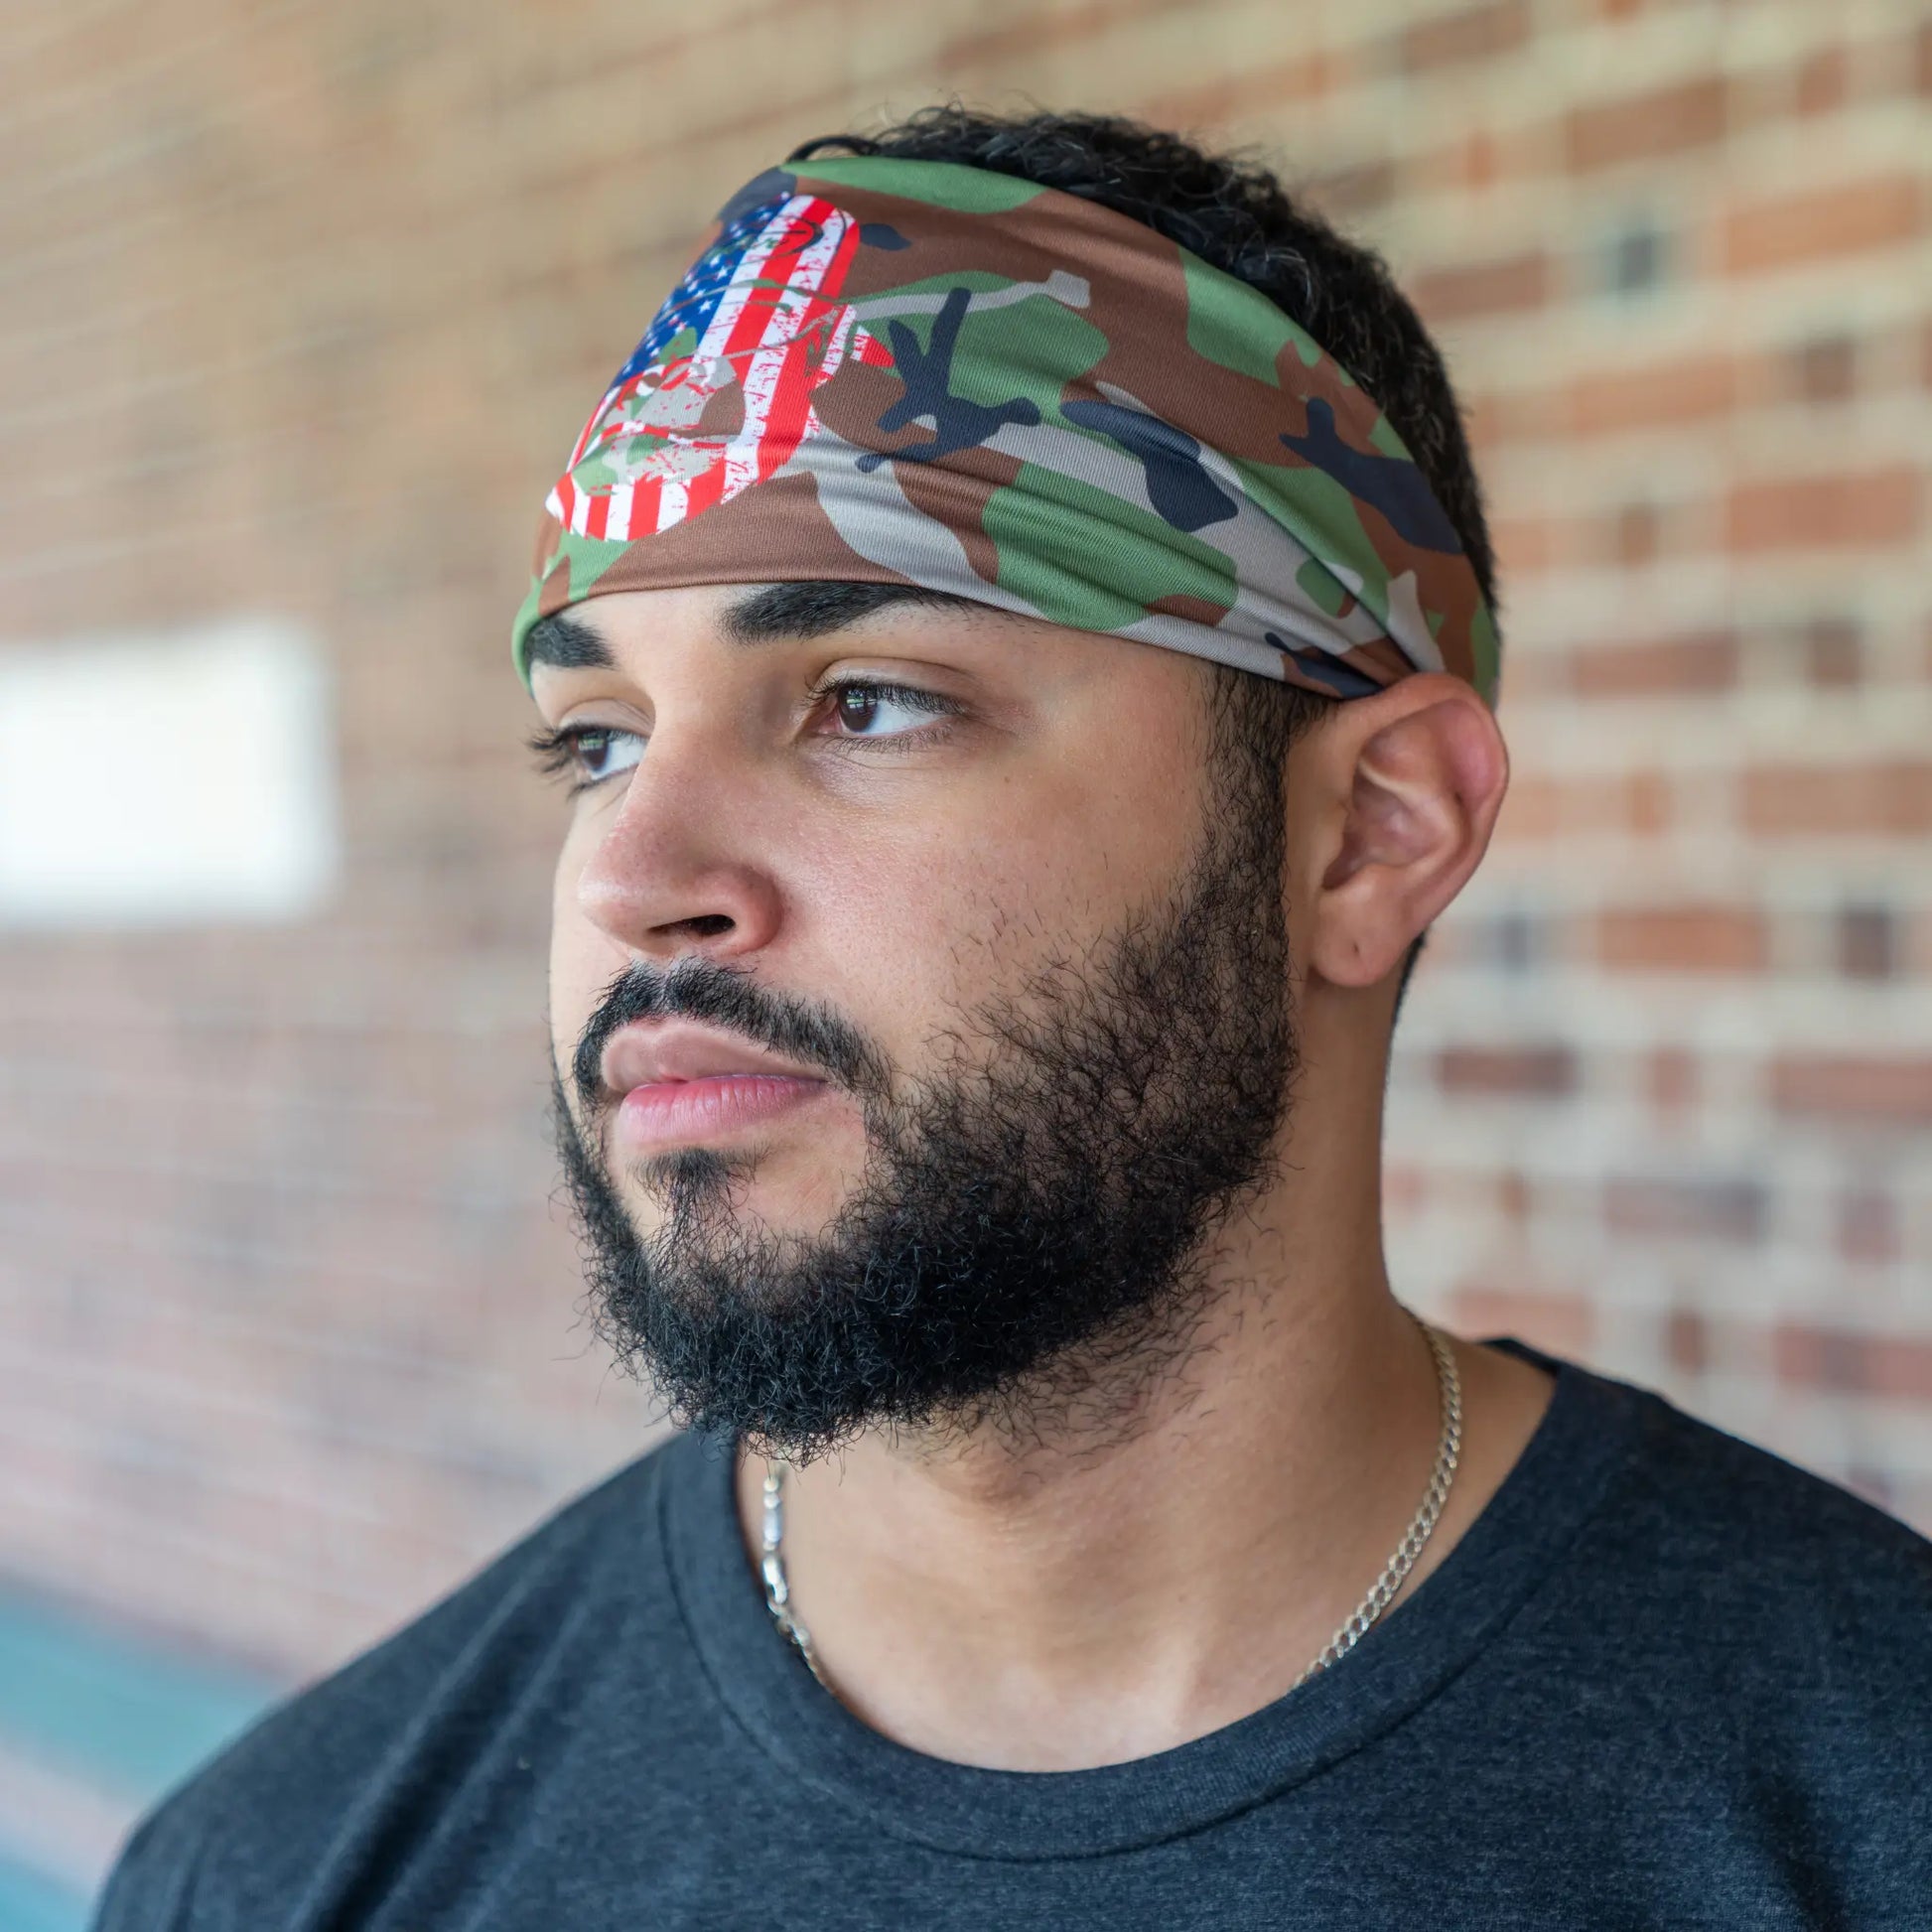 Profile view of a contemplative baseball player sporting a Tater Baseball camo headband featuring the USA flag, reflecting a commitment to both sport and country.